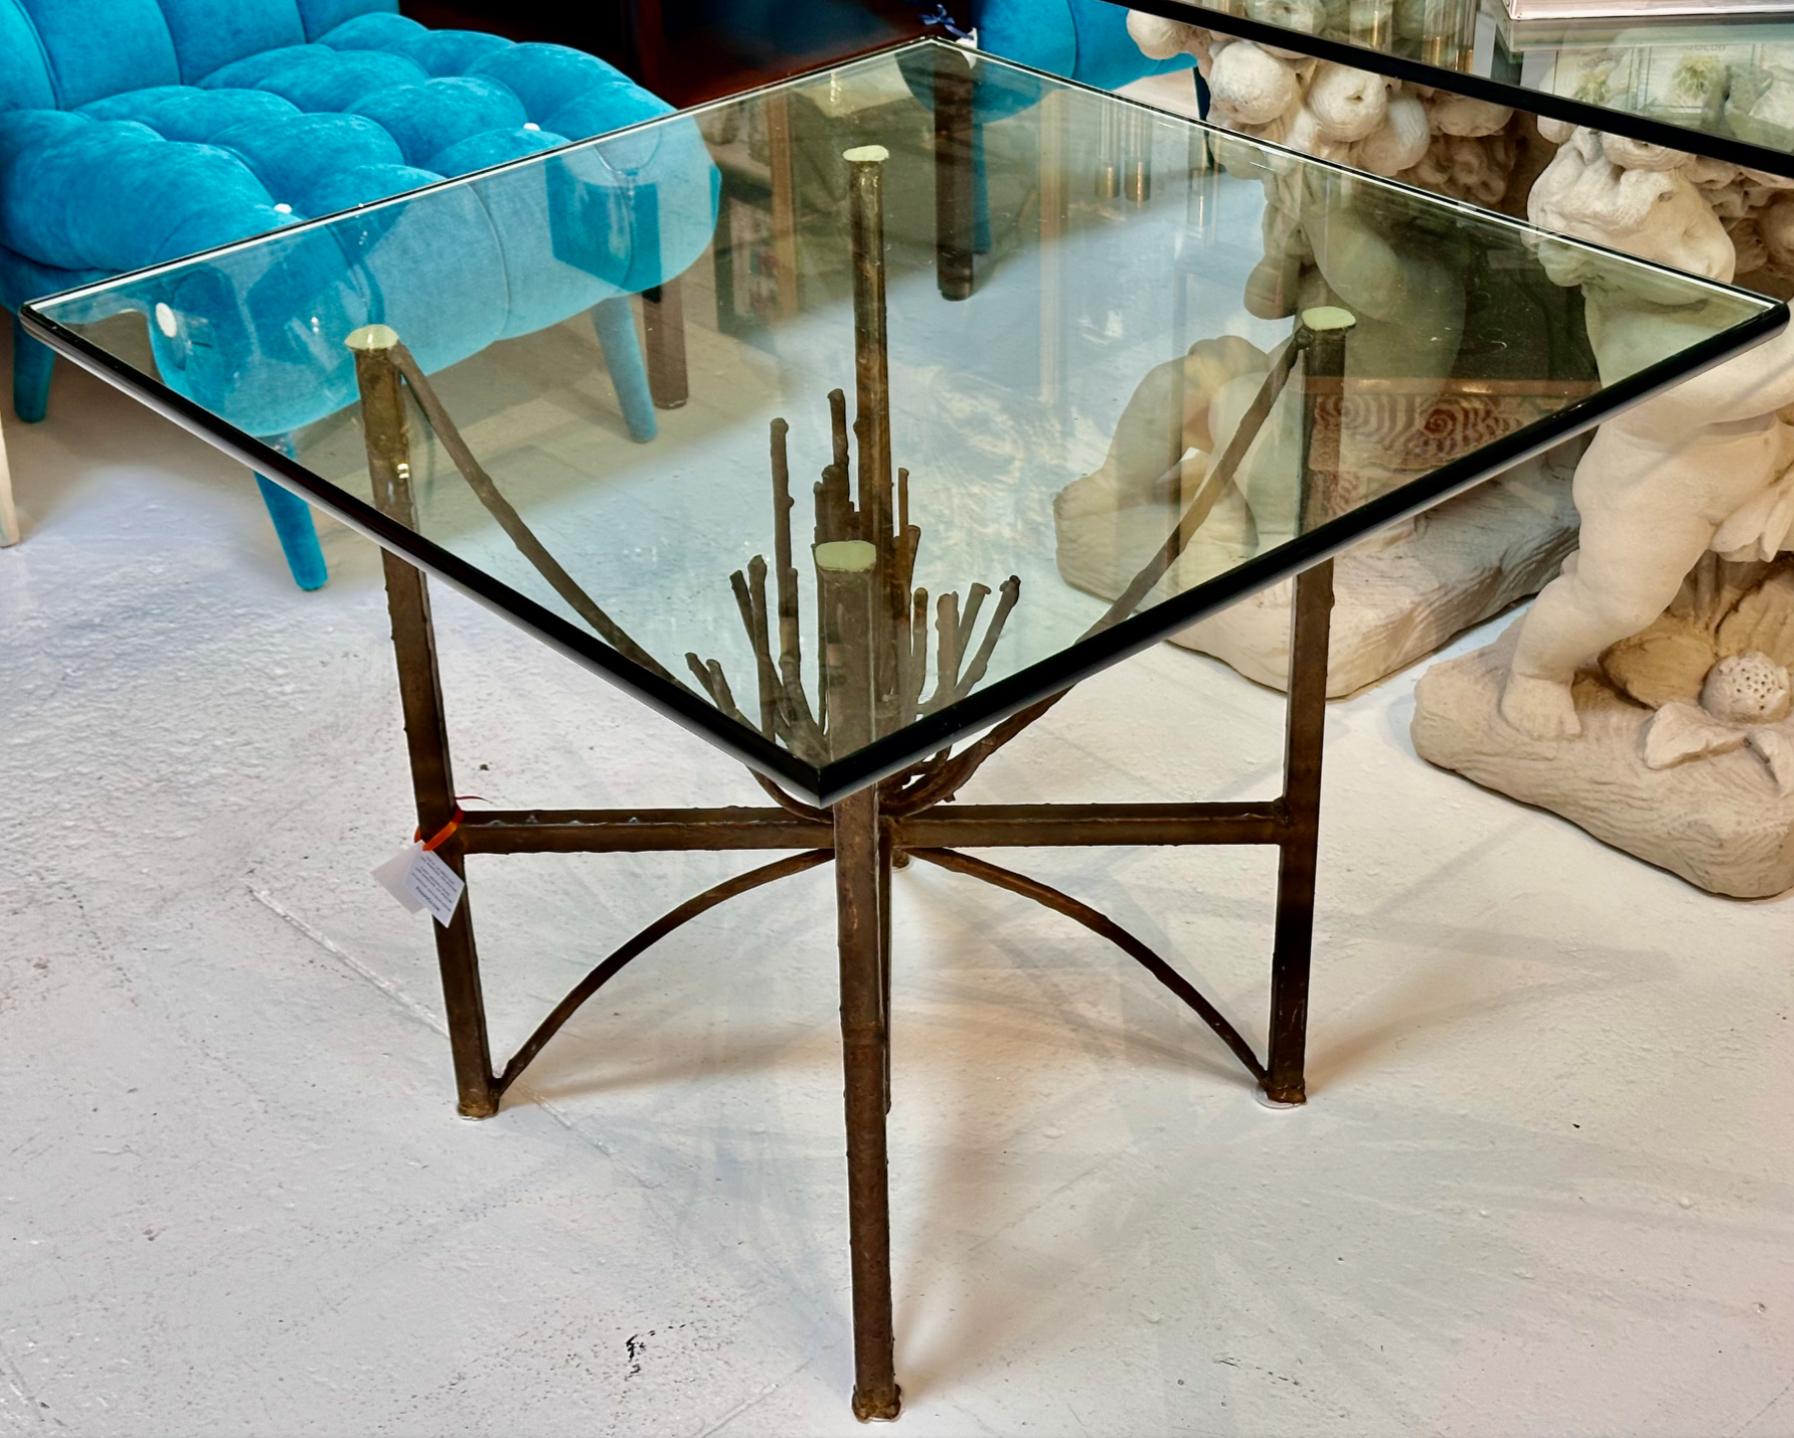 American Mid Century Modern Brutalist Sculptural Table For Sale